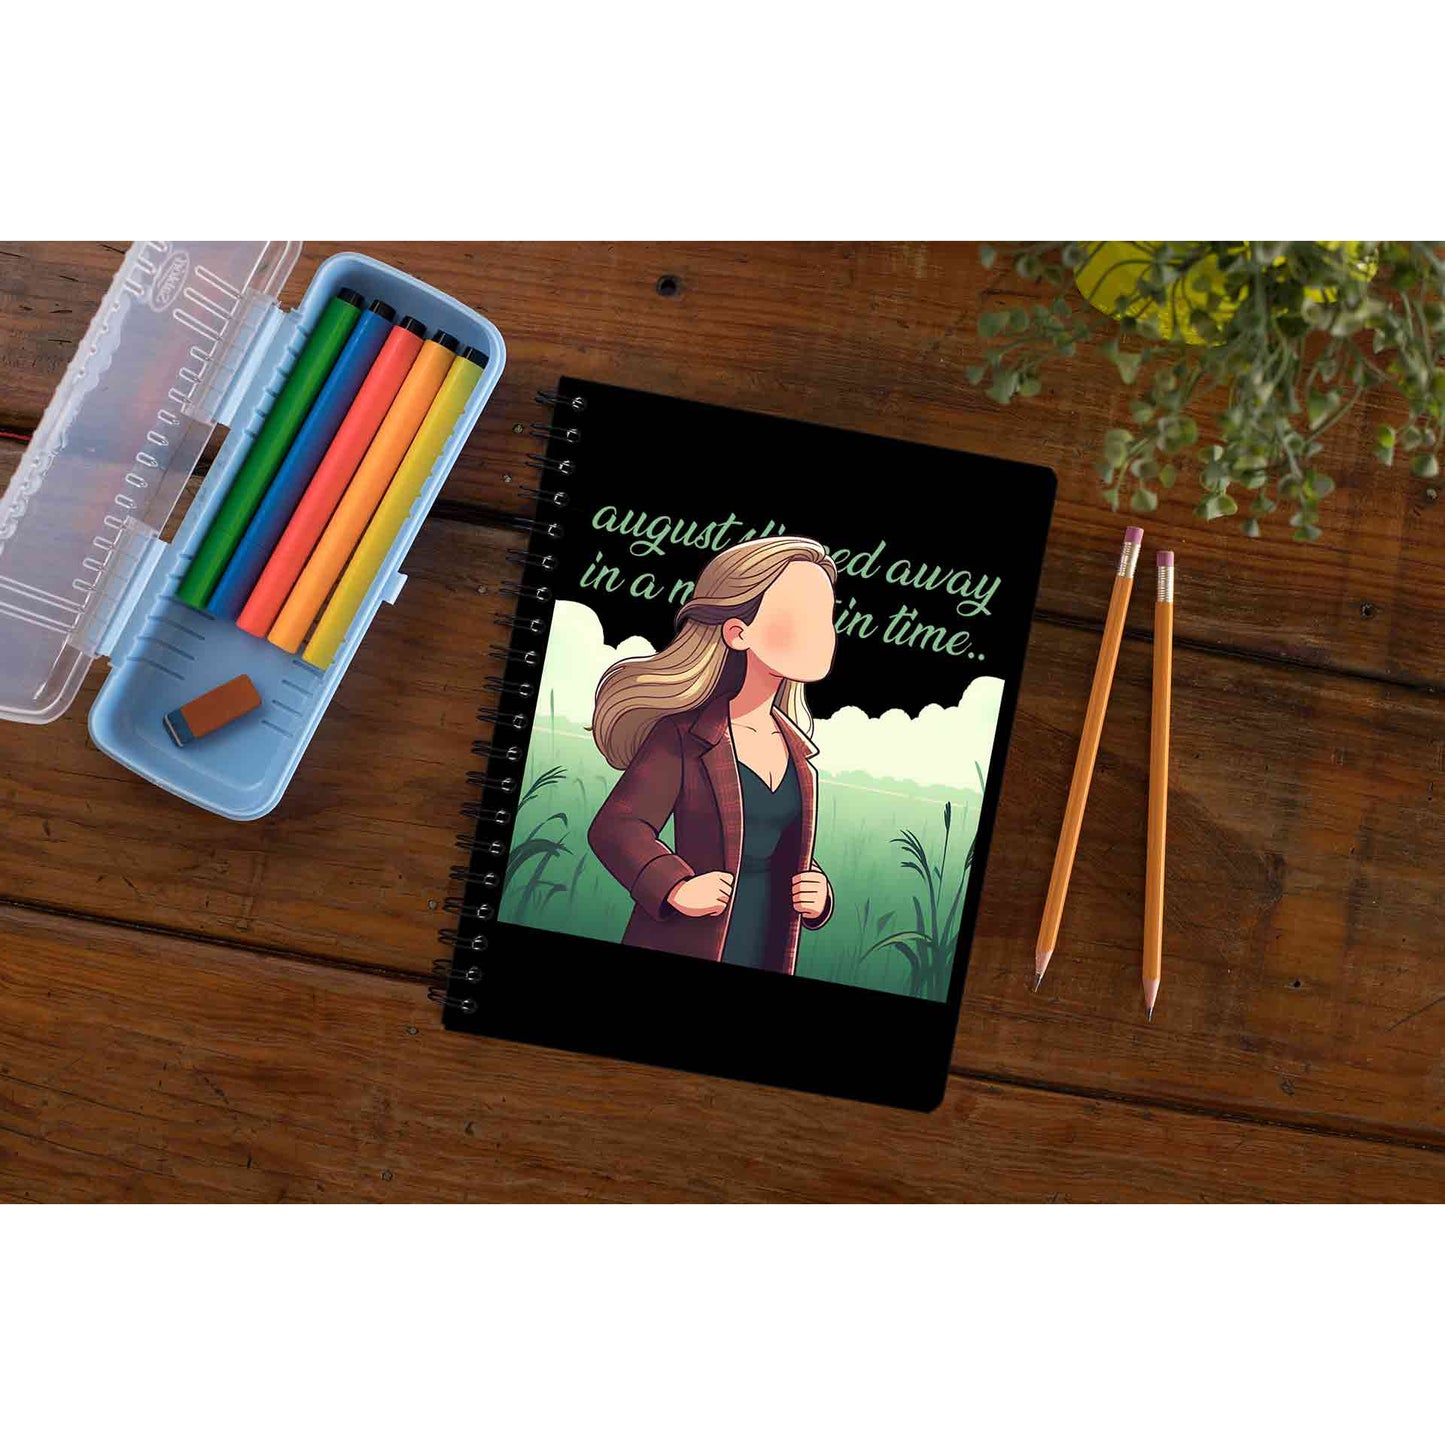 taylor swift august notebook notepad diary buy online united states of america usa the banyan tee tbt unruled 